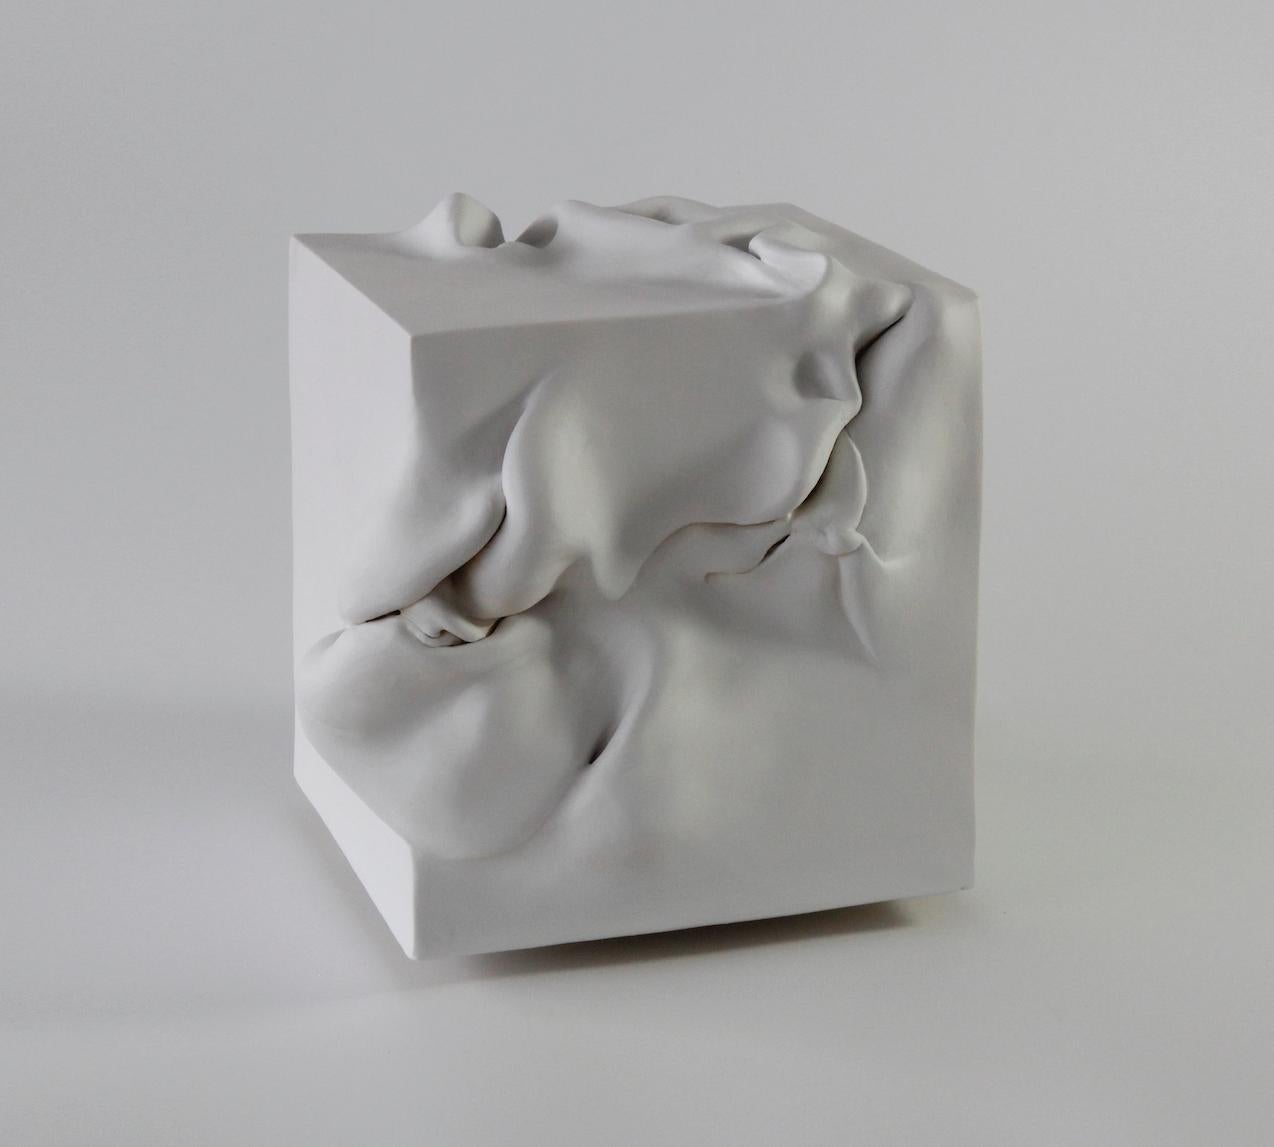 Cube 4 by Sharon Brill - Abstract Clay Sculpture, white, organic forms